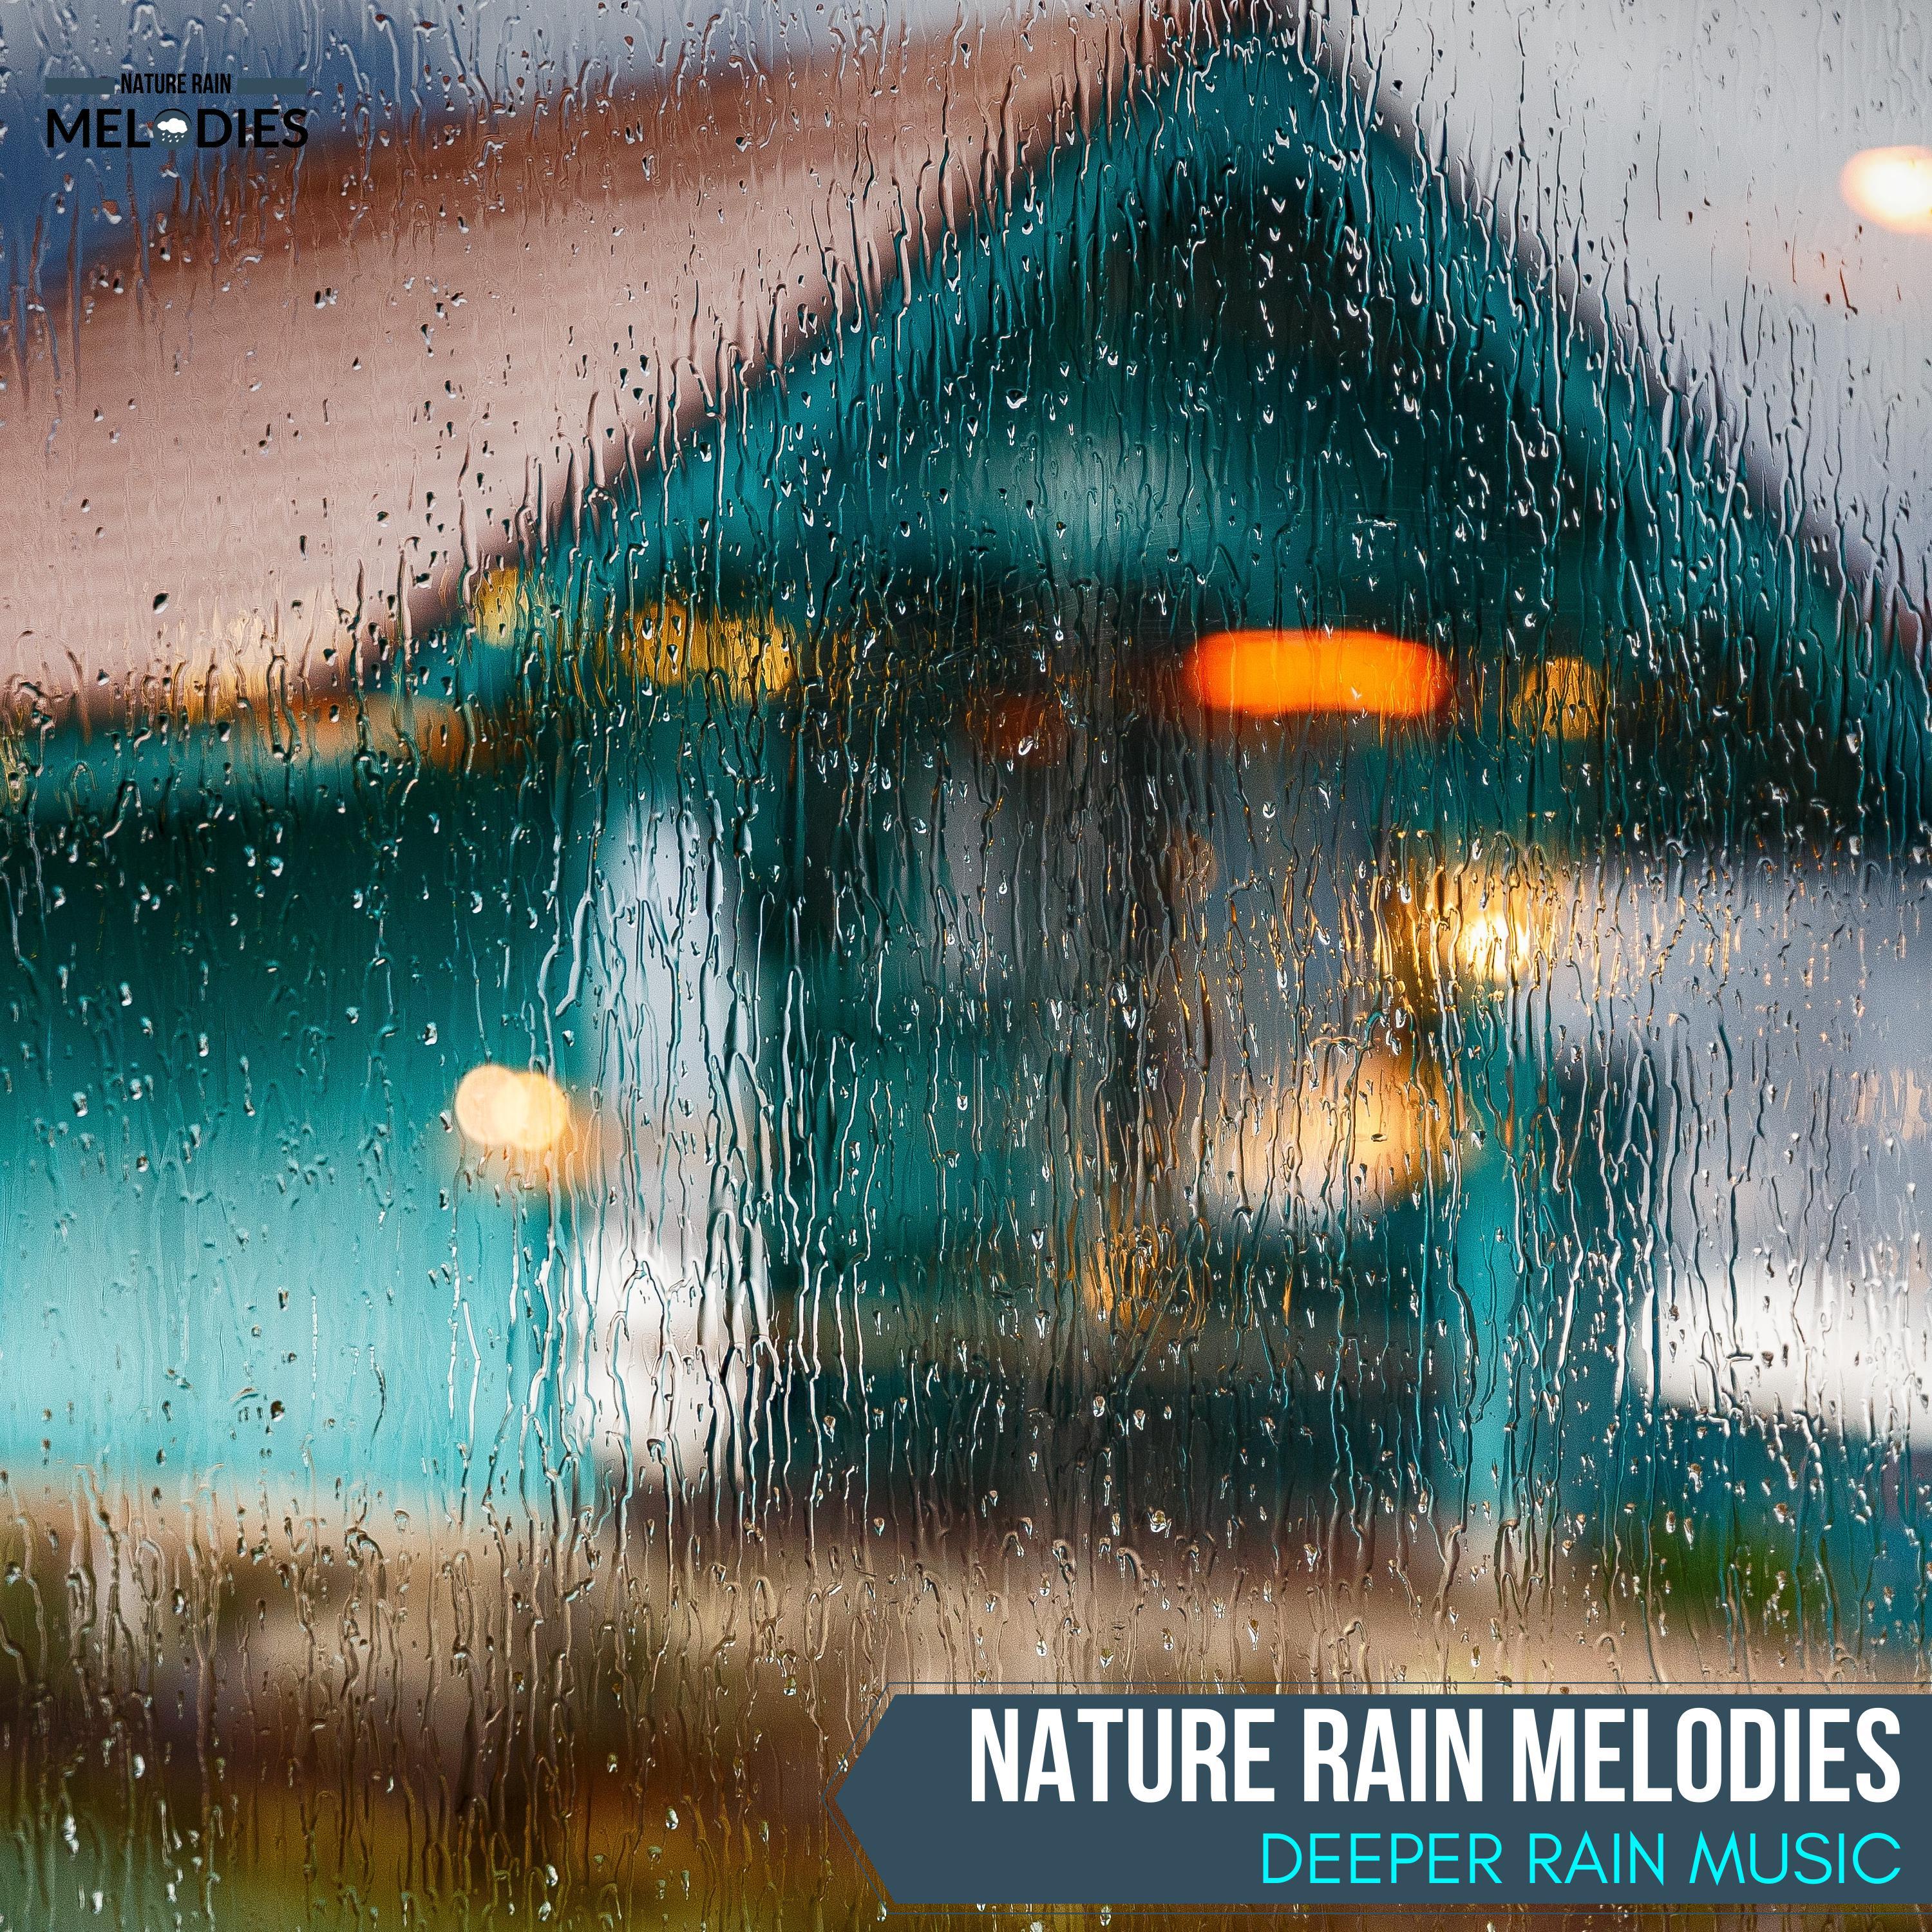 Nature Musical Remedies - Rhythmic Gurgles and Splashes